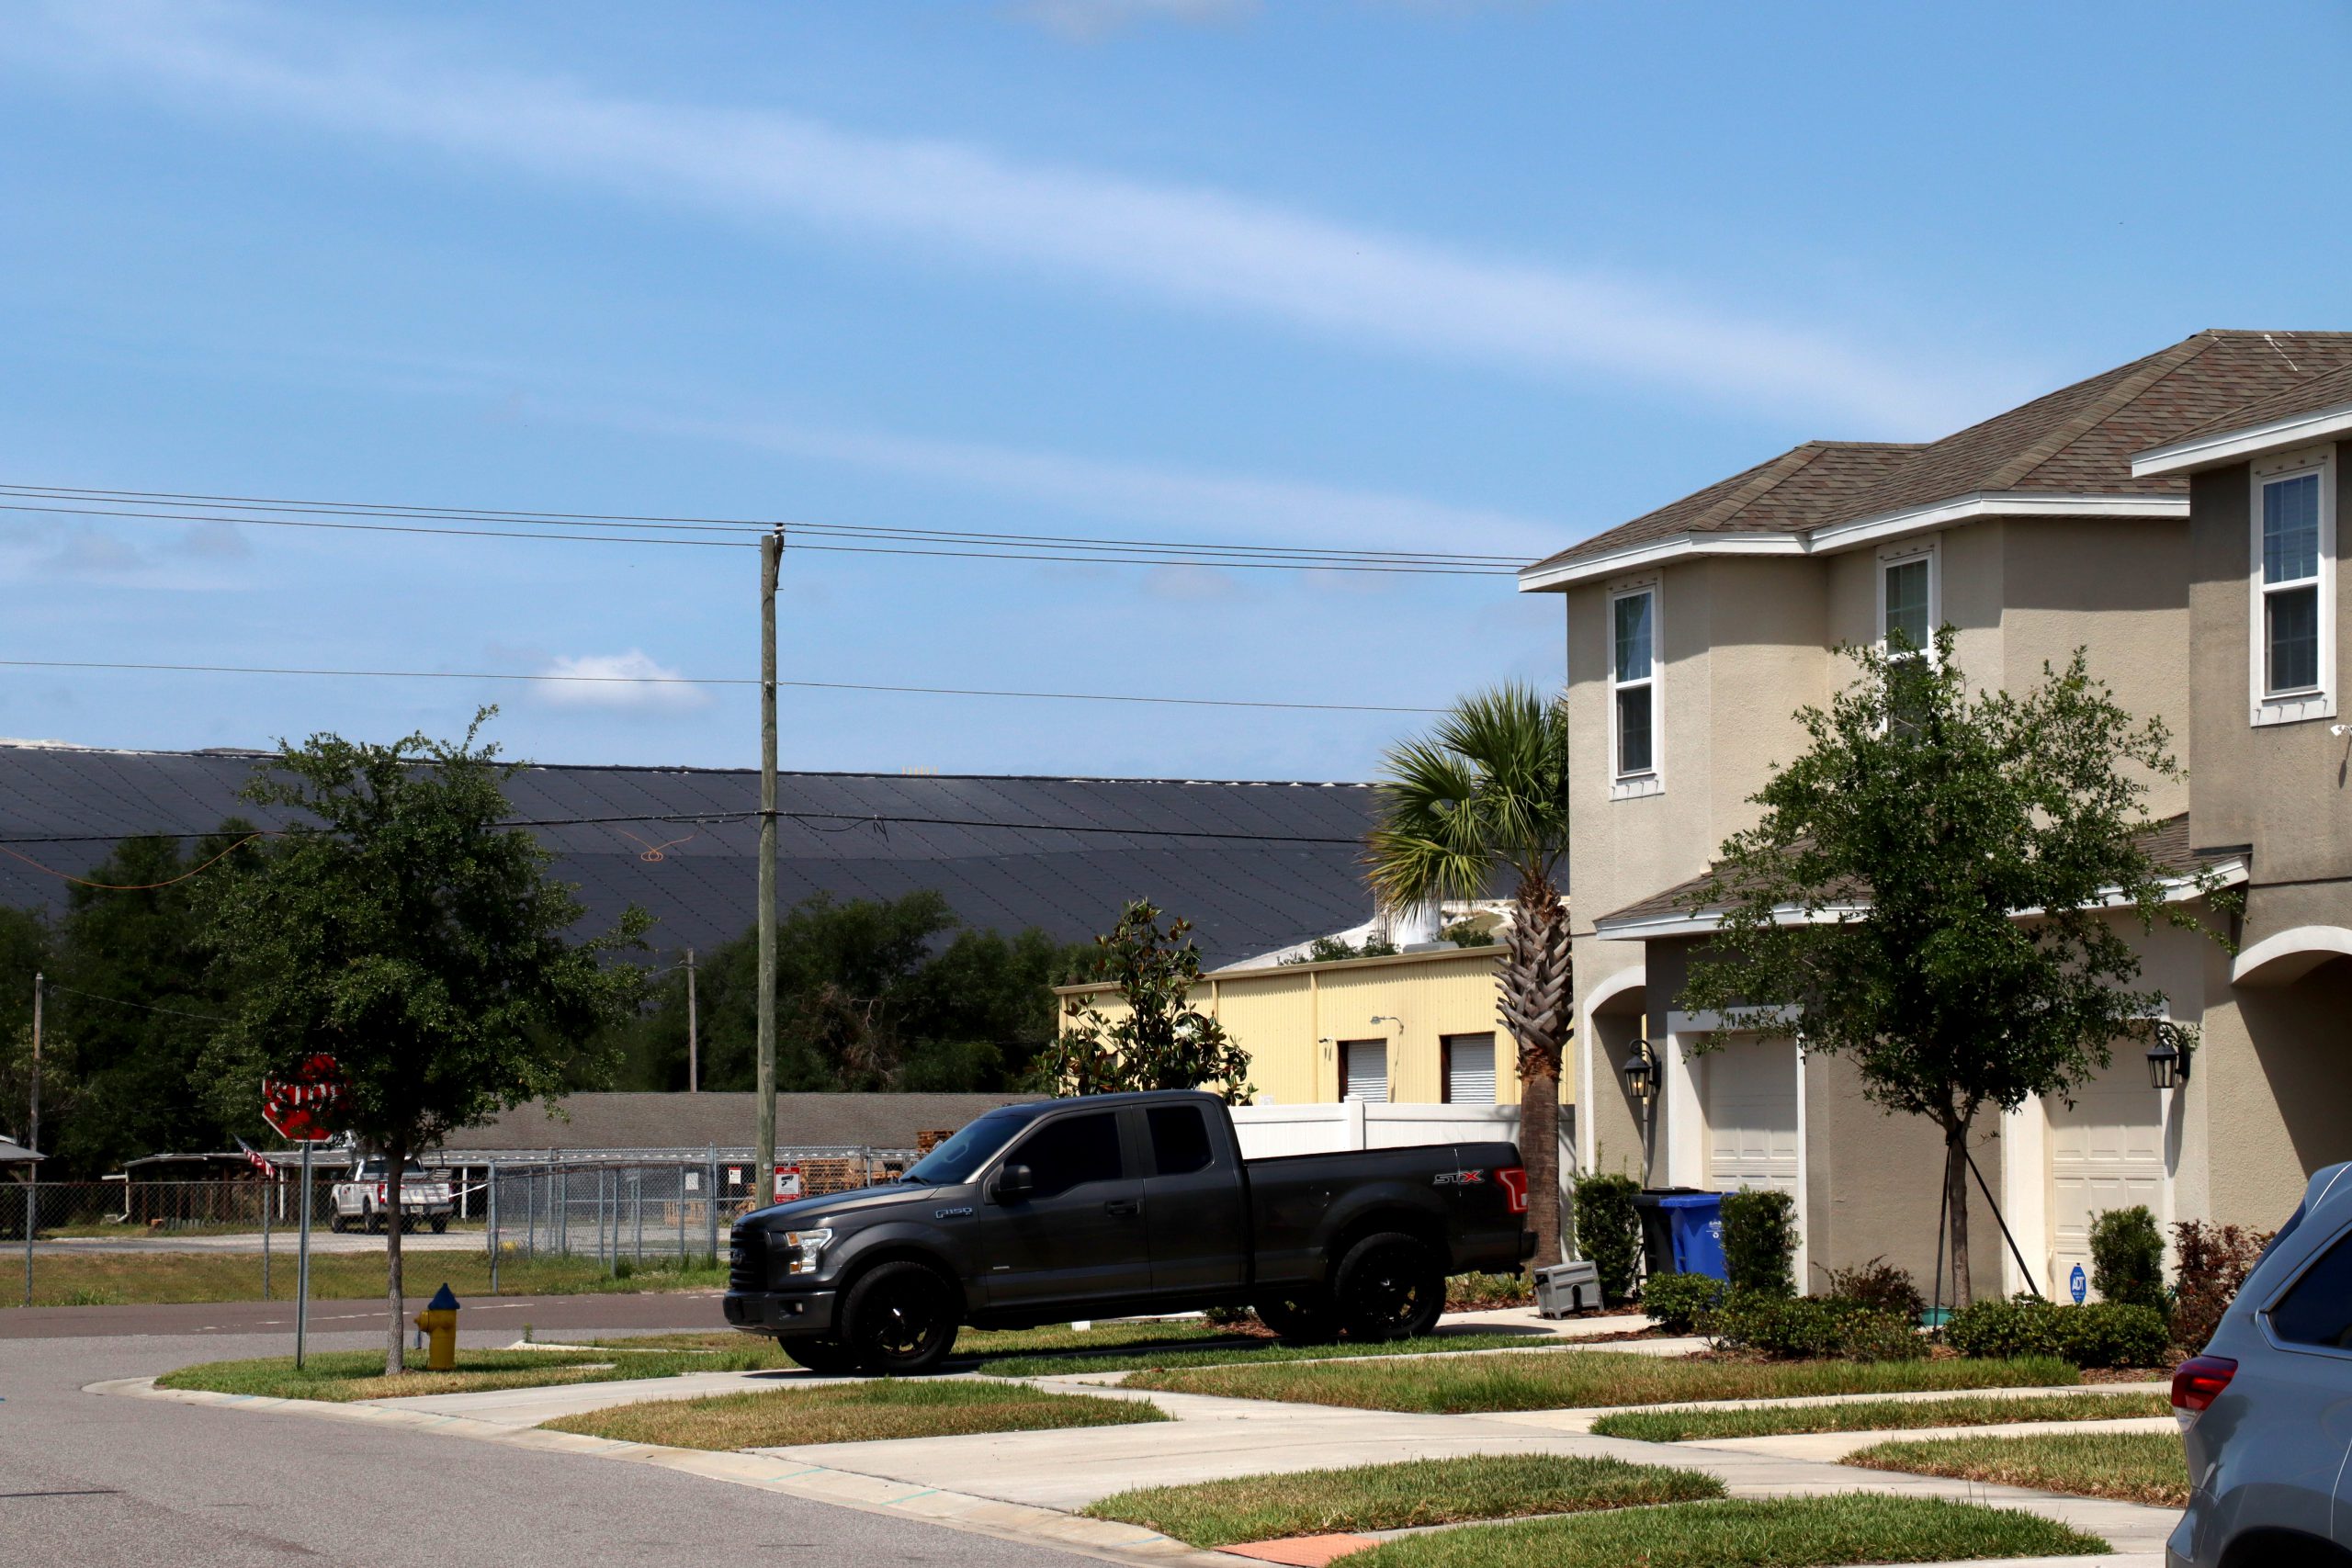 A community of recently built townhomes a few hundred feet from a phosphogypsum stack in Riverview, Florida, Friday, April 14, 2023. (Alan Halaly/WUFT News)